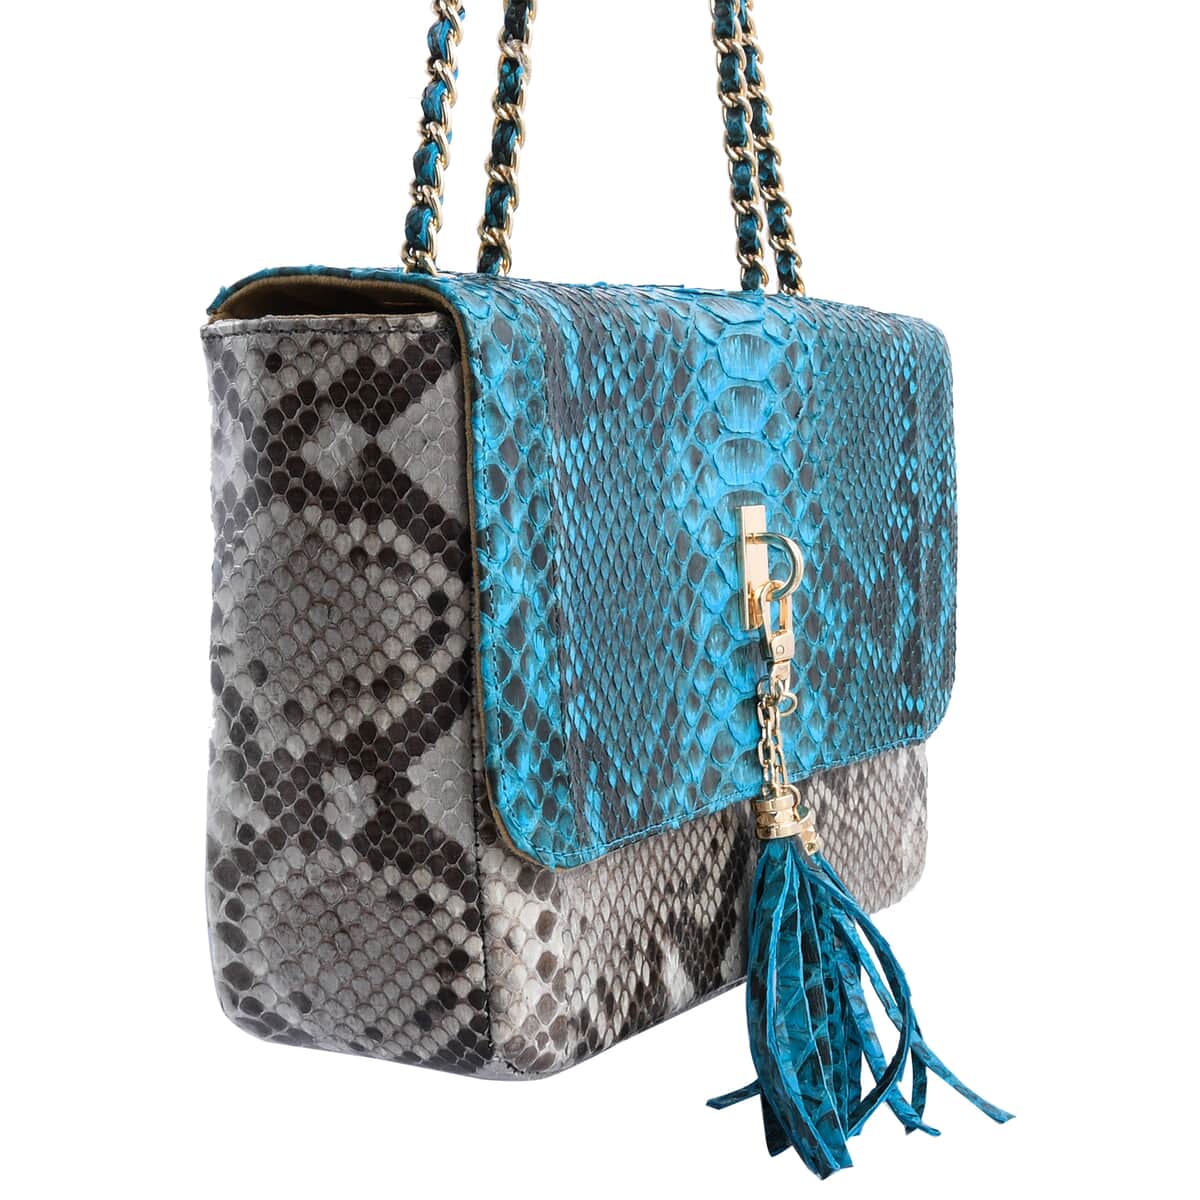 The Grand Pelle Handcrafted Black Color 100 % Genuine Python Leather Crossbody Bag (10.00"x6.75"x3.5") image number 6